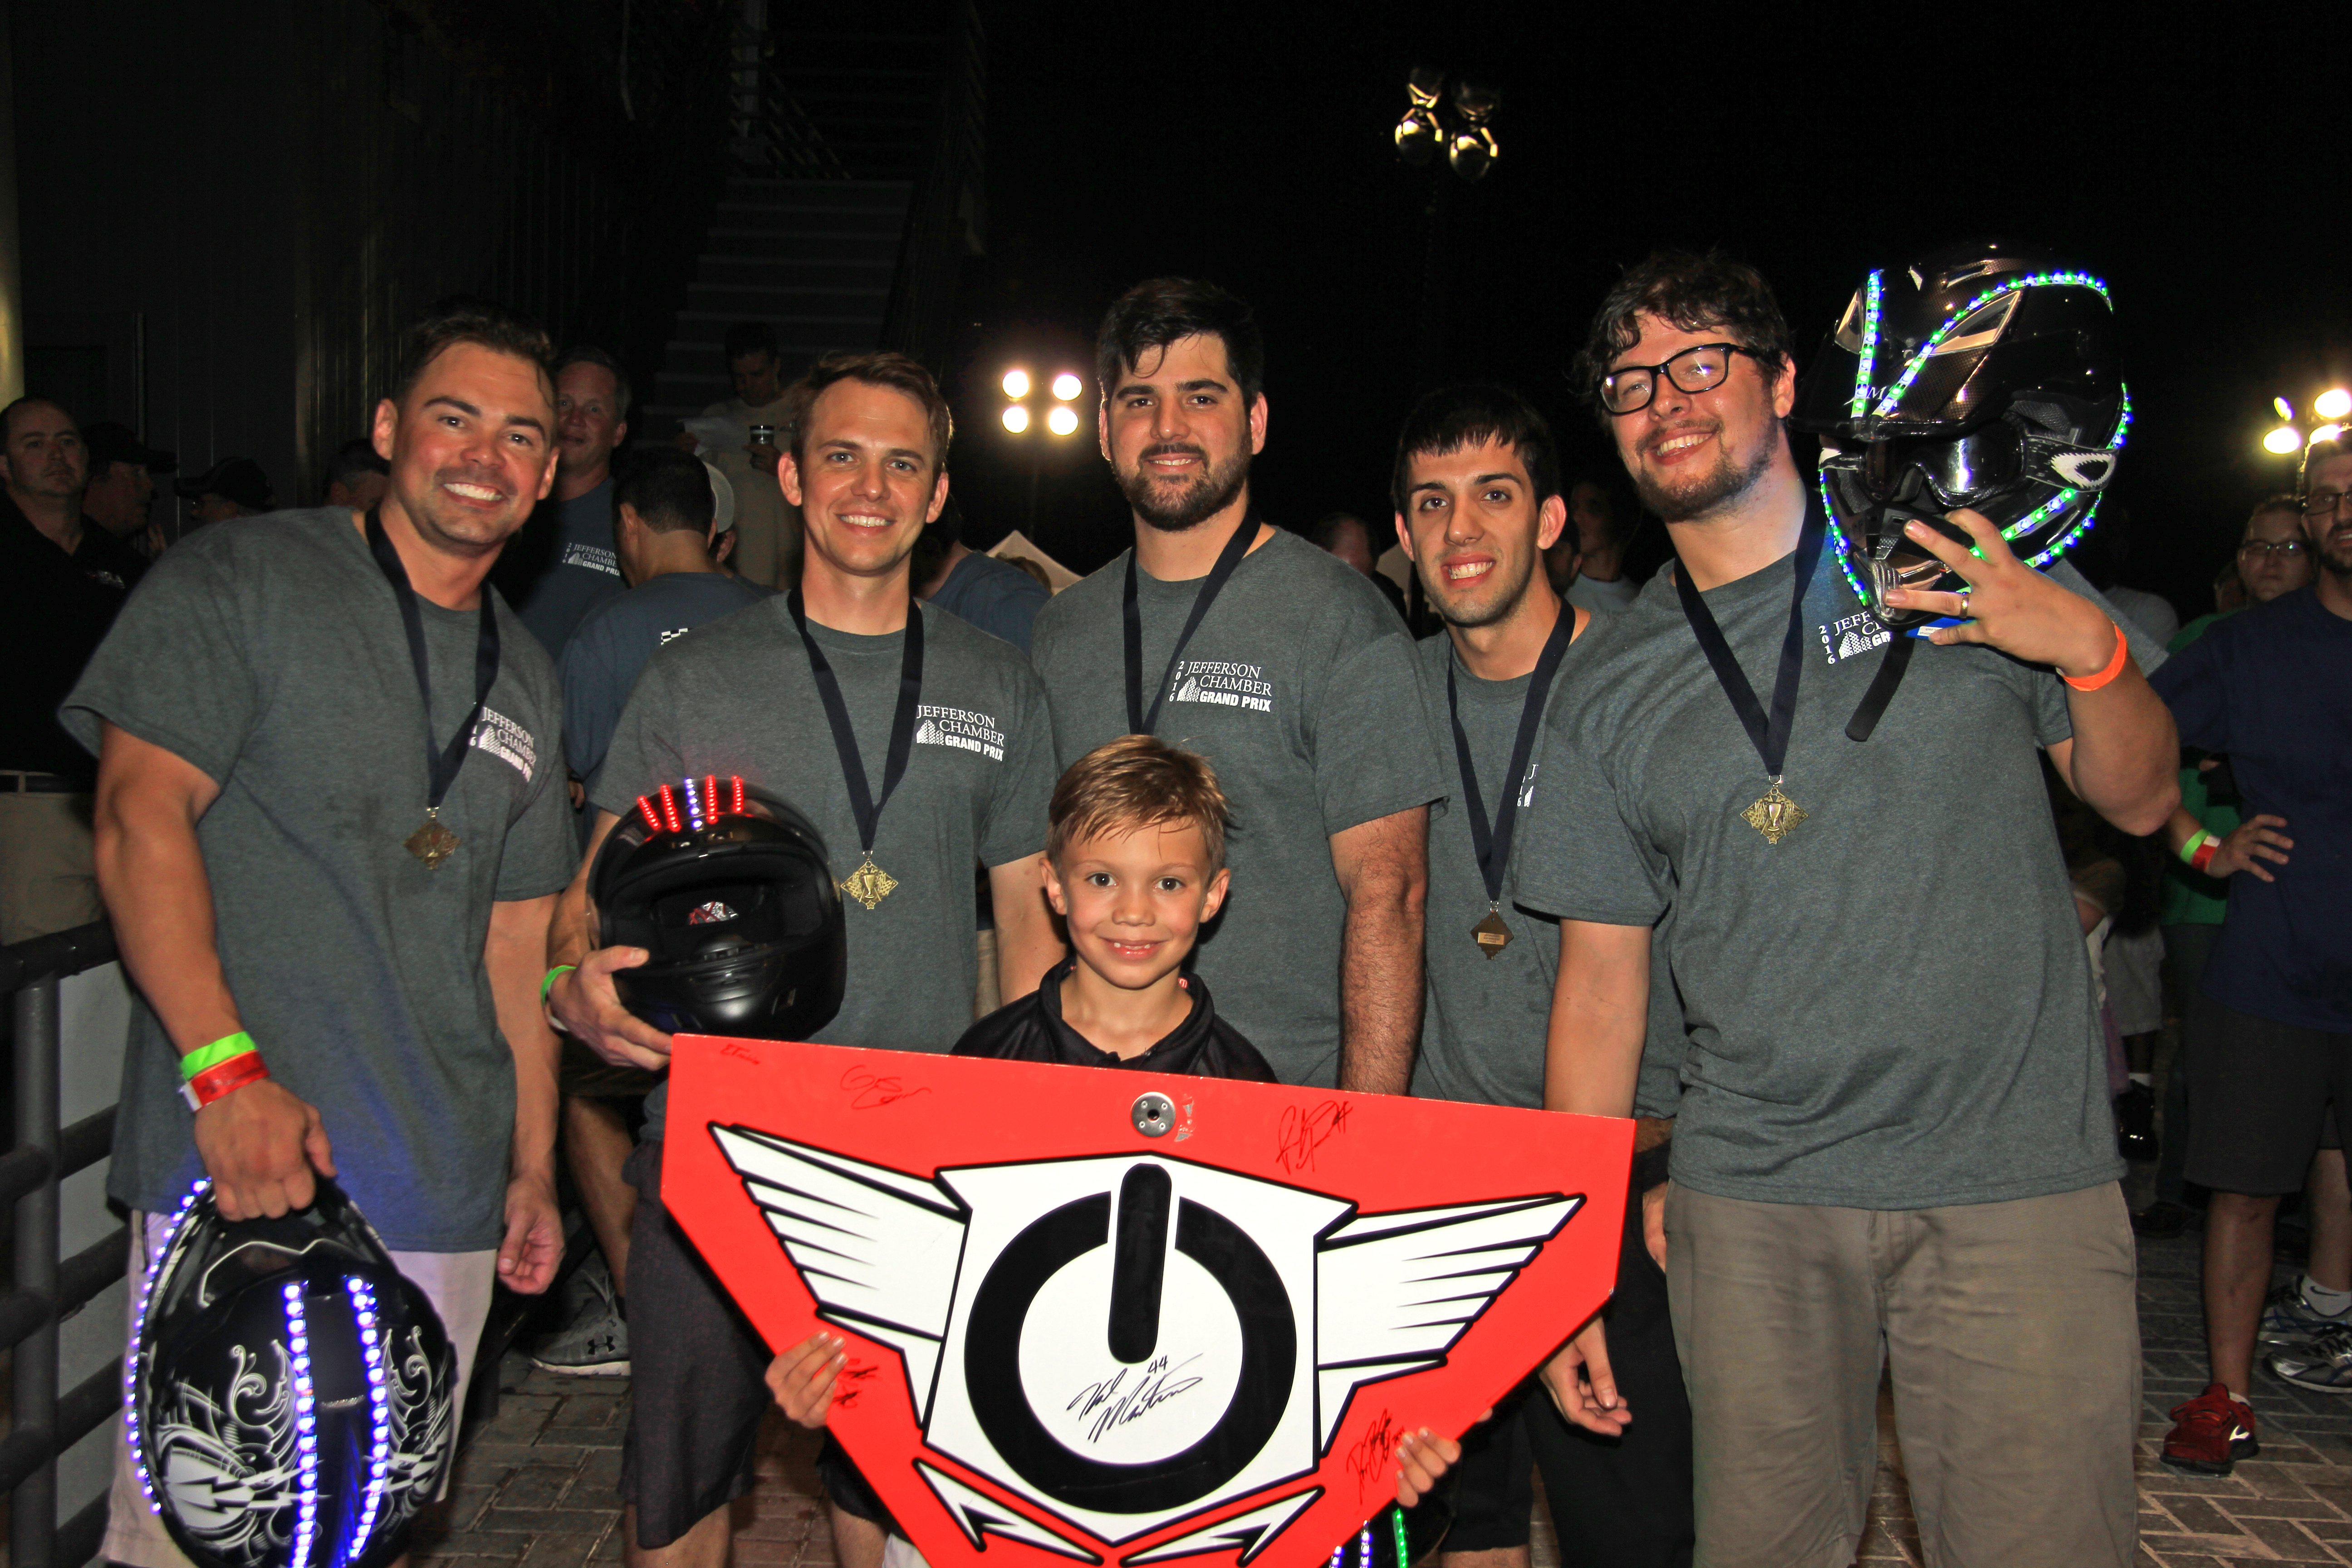 Justin Hartenstein, Danny Talbot, Kirk Jenevein, Stephen Lamana, Patrick Greenfield, and Team Manager Justin Hartenstein Jr. (holding the team logo) representing Oracle Lighting won first place in the Jefferson Chamber of Commerce's 5th annual Grand Prix, Weds. July 13, 2016, at NOLA Motorsports, Avondale, La. (Photo: DJ Ronnie Roux, Snap And Sketch Photo Booths)